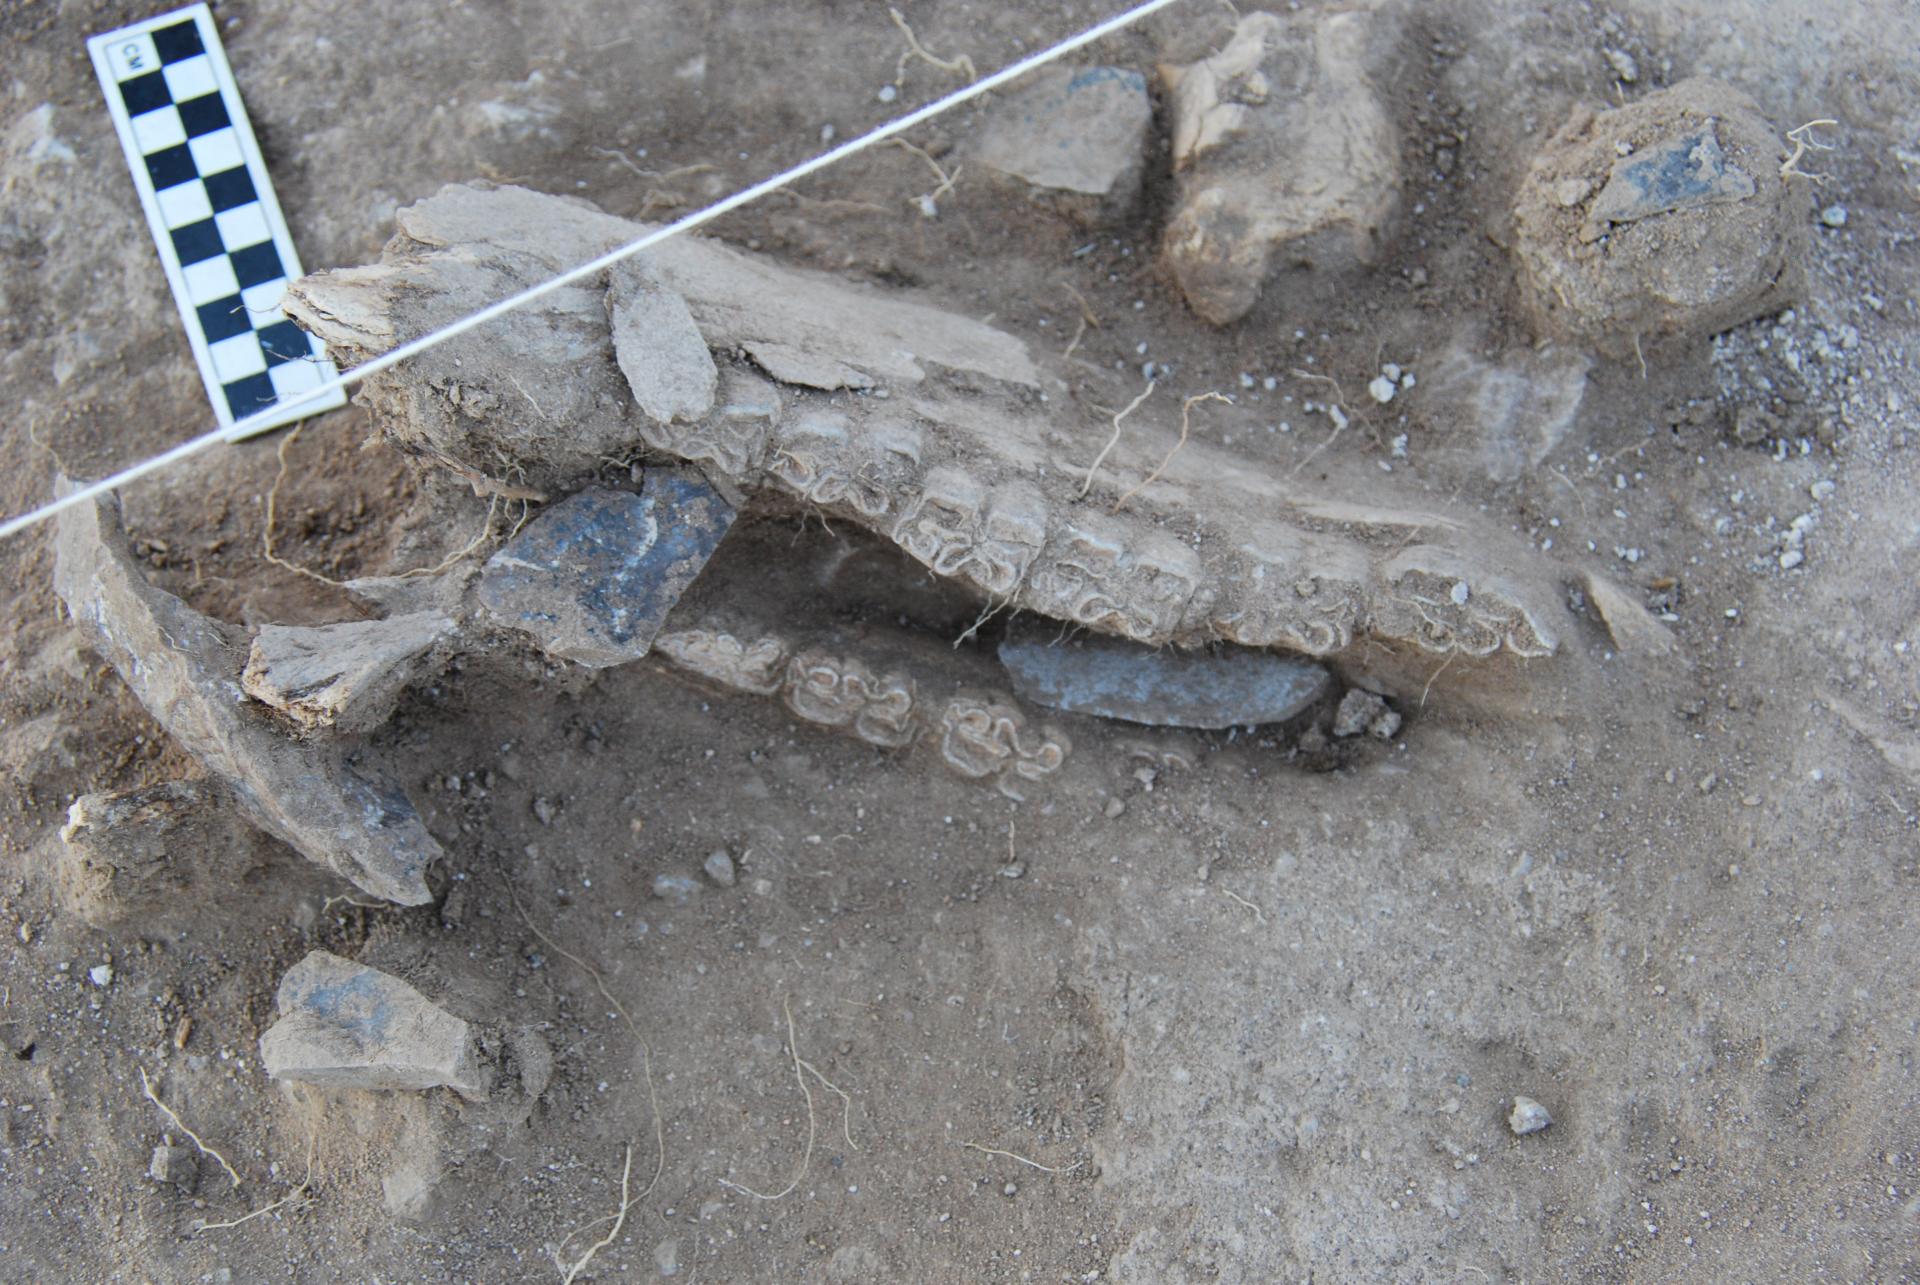 A horse's skull with a stone blade in place of a tongue being excavated.